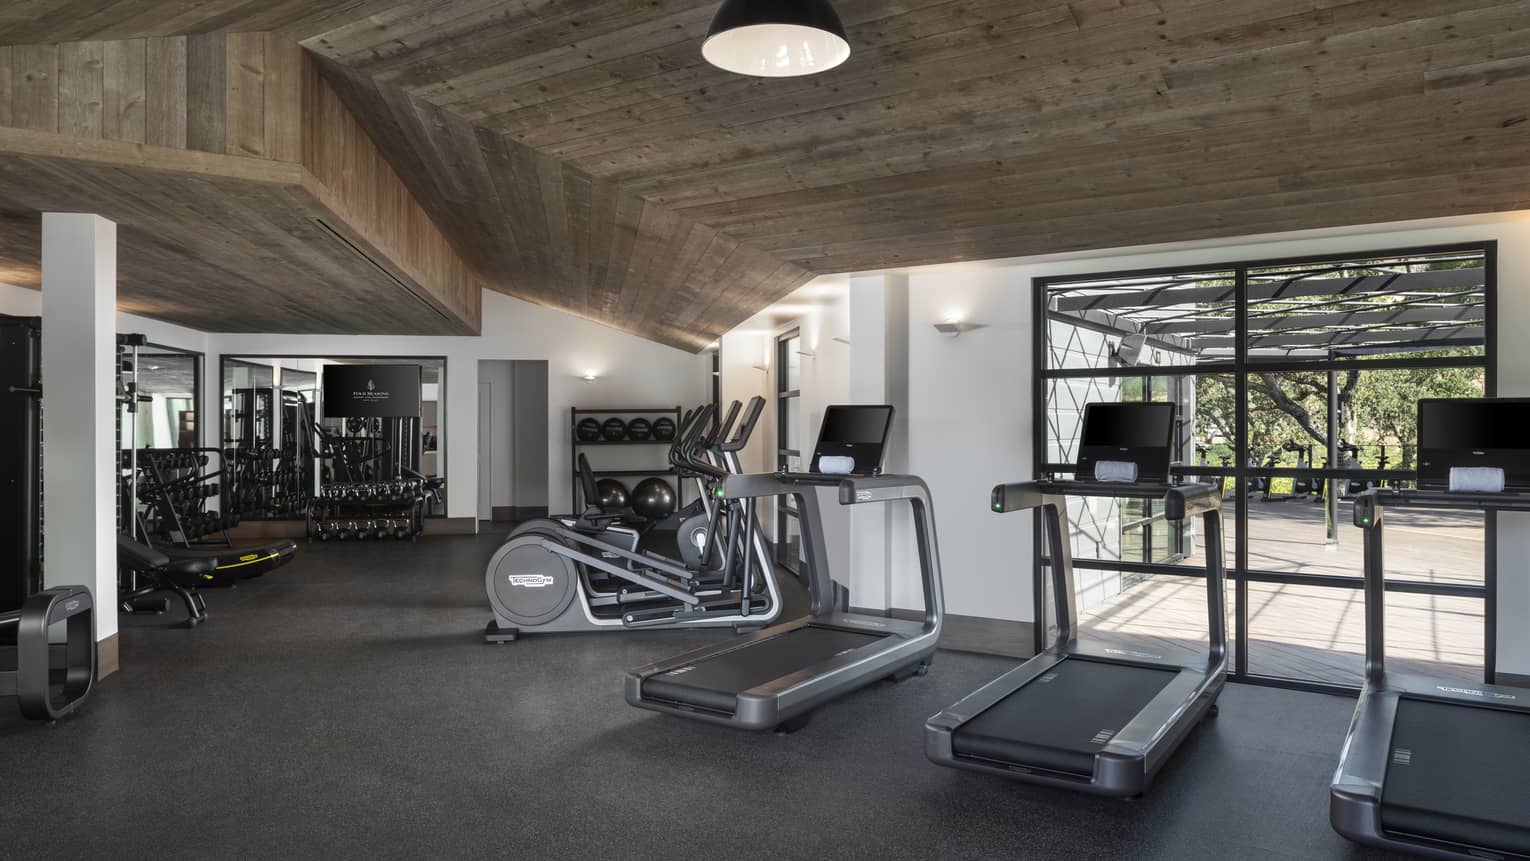 Fitness room with wooden ceiling, three treadmills, windows, ellipticals and weights